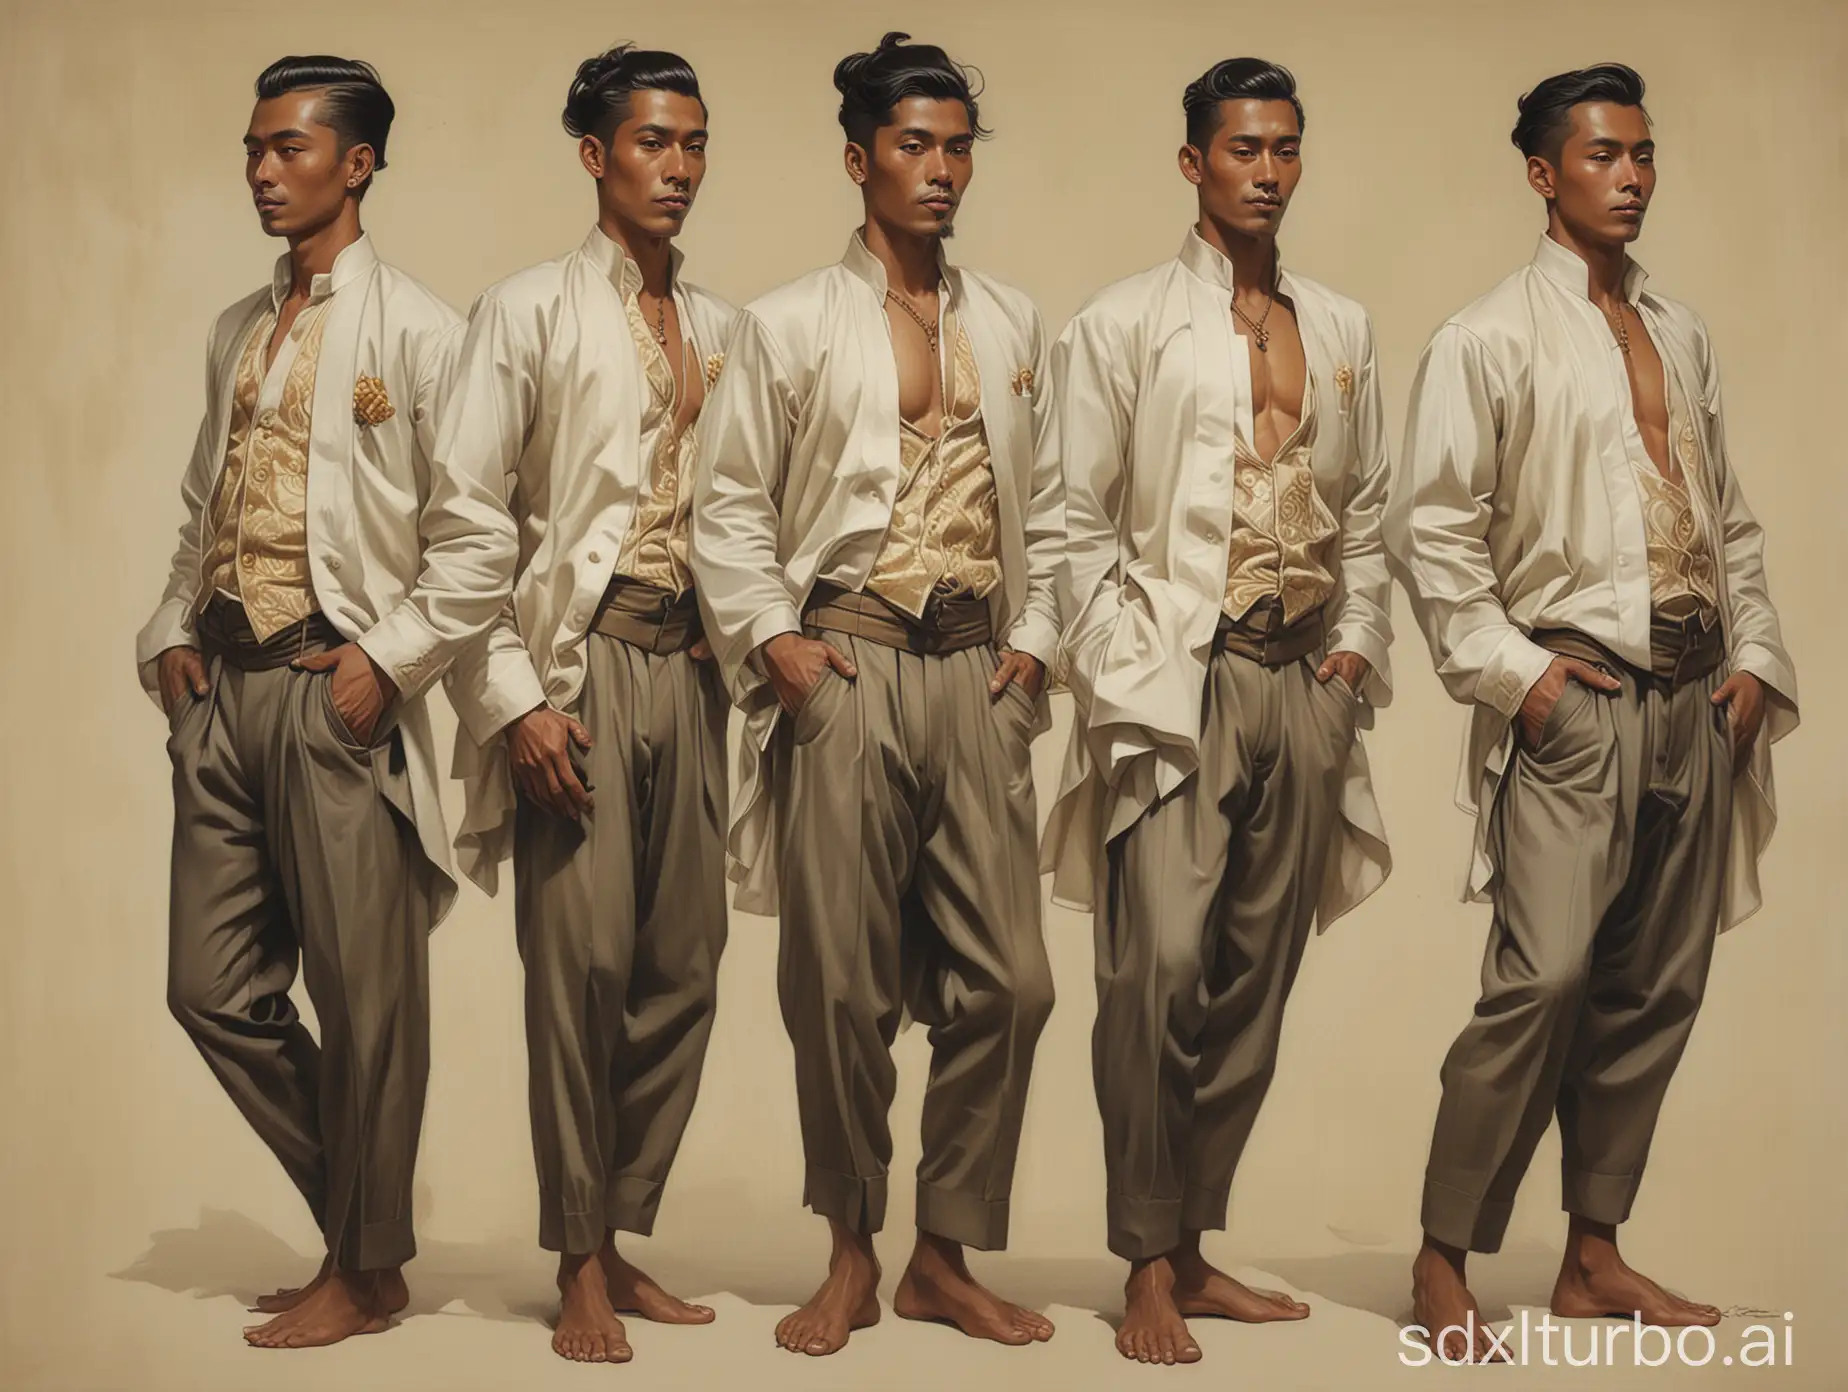 four Javanese men, tanned, in a sensual pose, shown in full body, in Leyendecker illustration style. Each of them has a different body type, facial structure, and hairstyle.